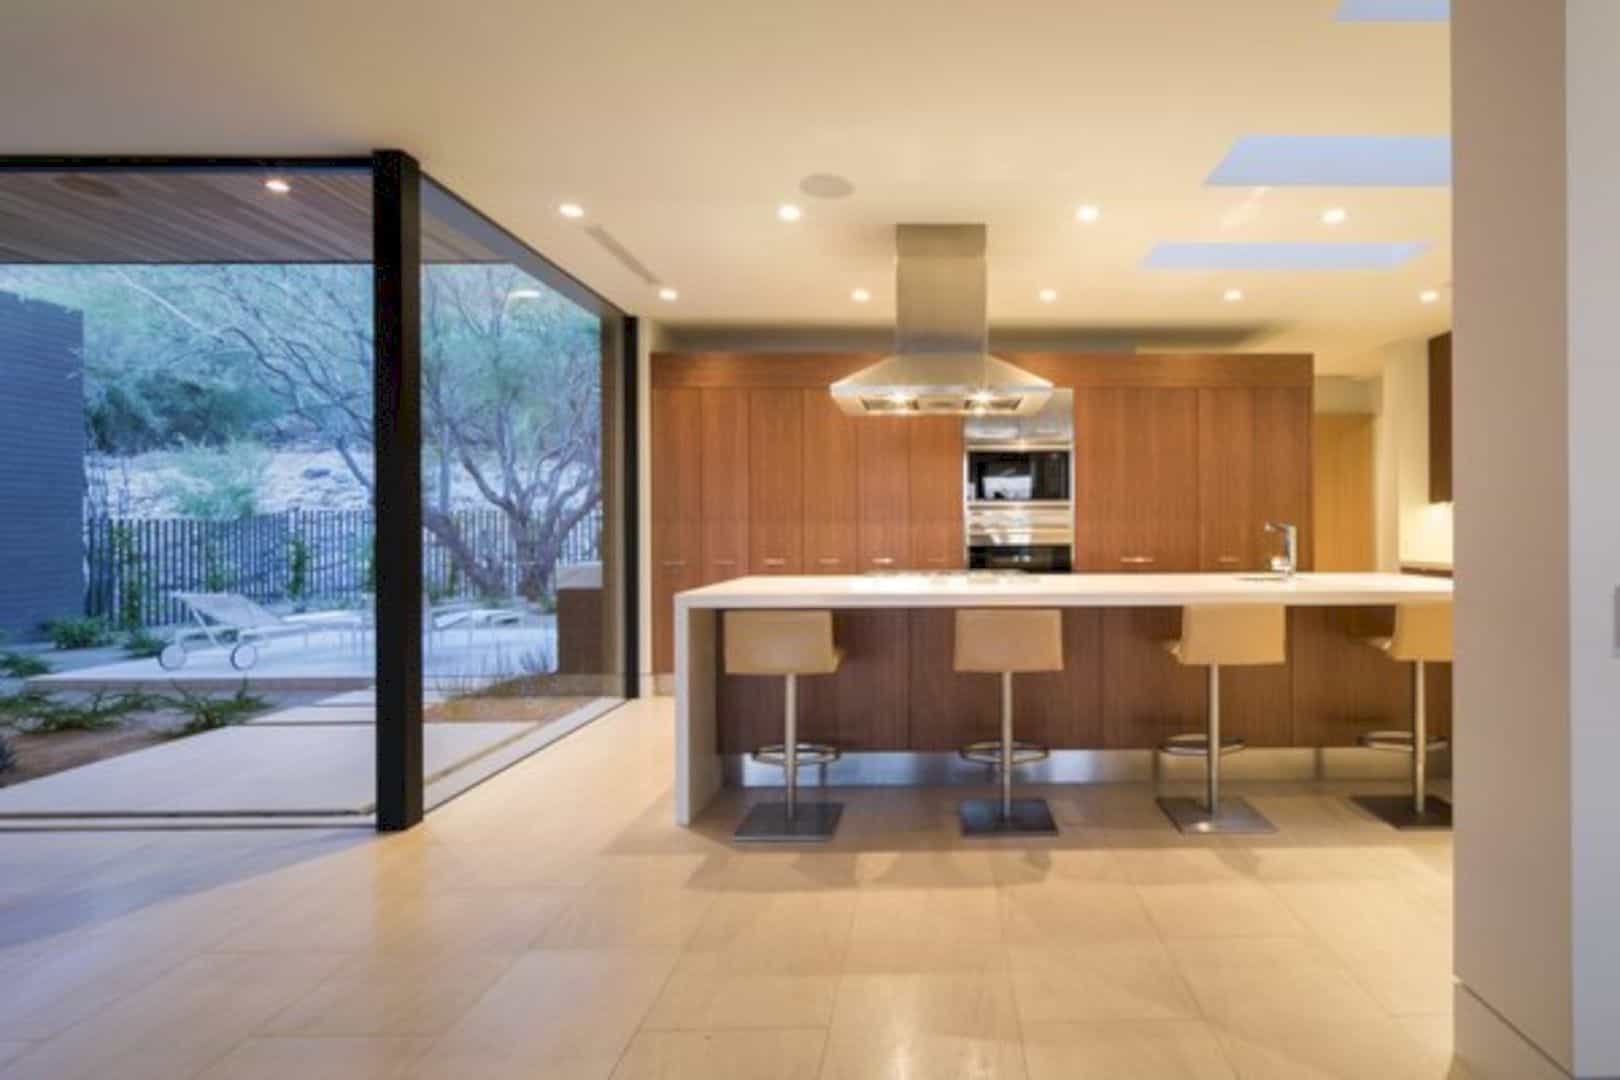 The Rammed Earth Modern Residence A Modest Yet Sophisticated Residence Dominated By Humble Materials 8